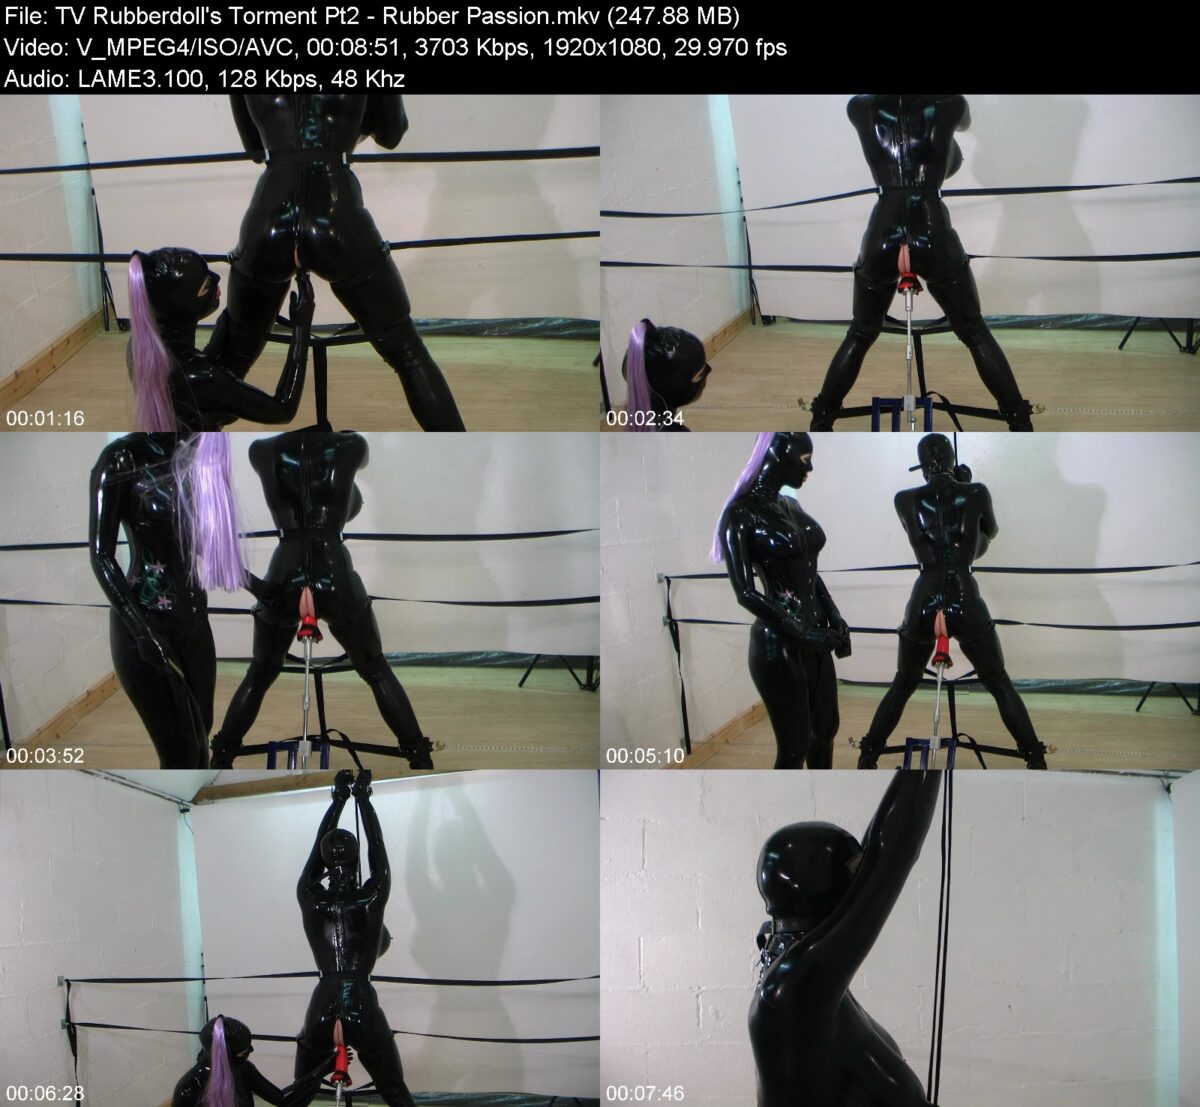 TV Rubberdoll's Torment Pt2 in Rubber Passion